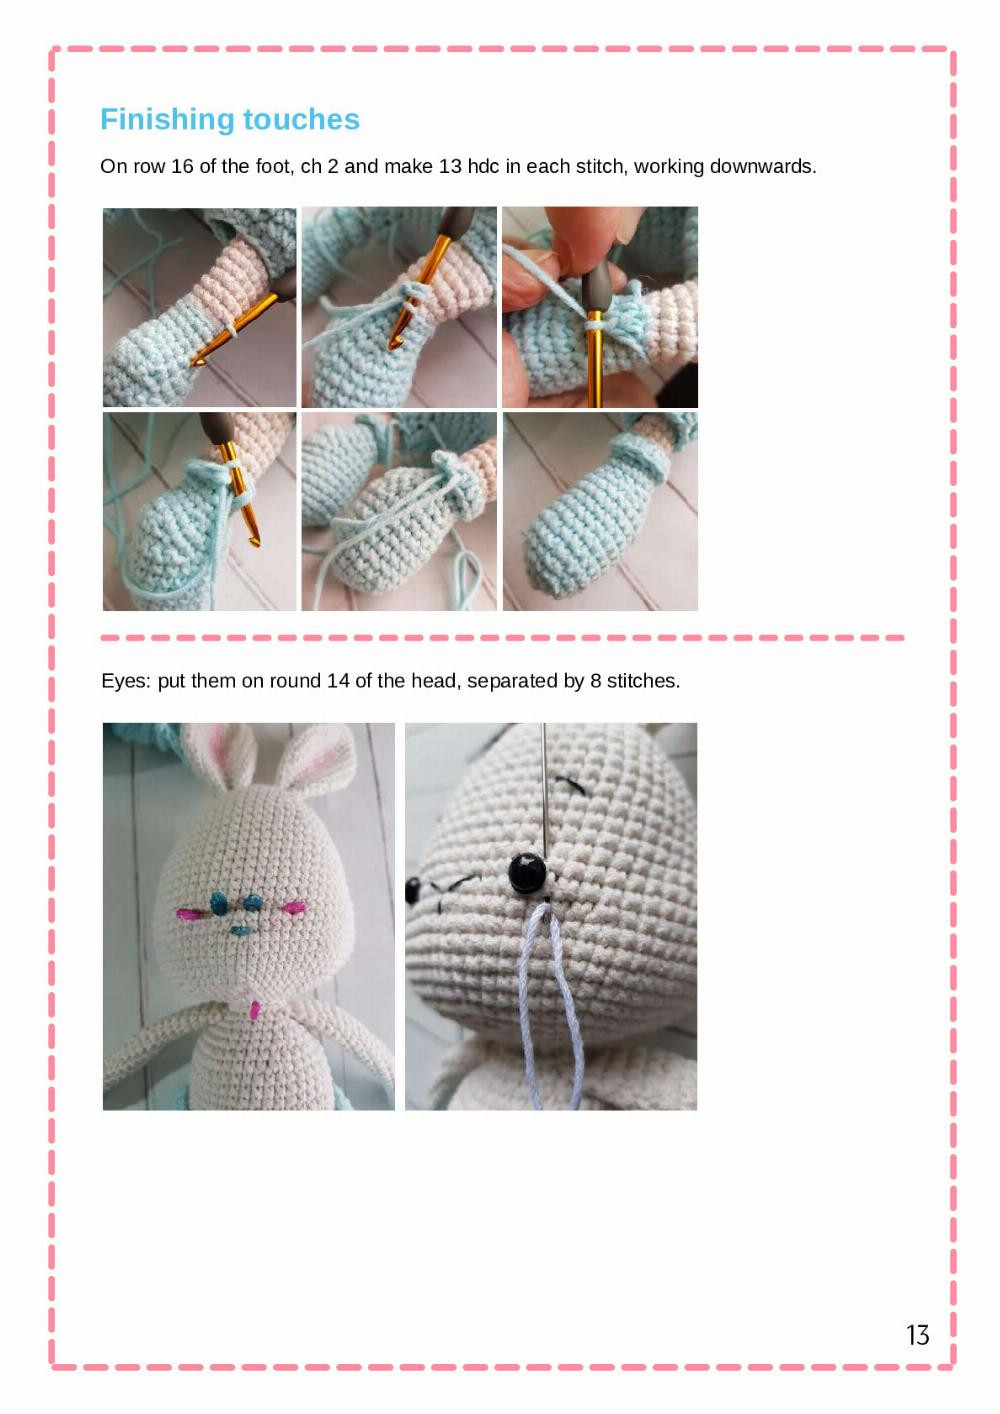 Twin Bunnies Pattern Step by Step